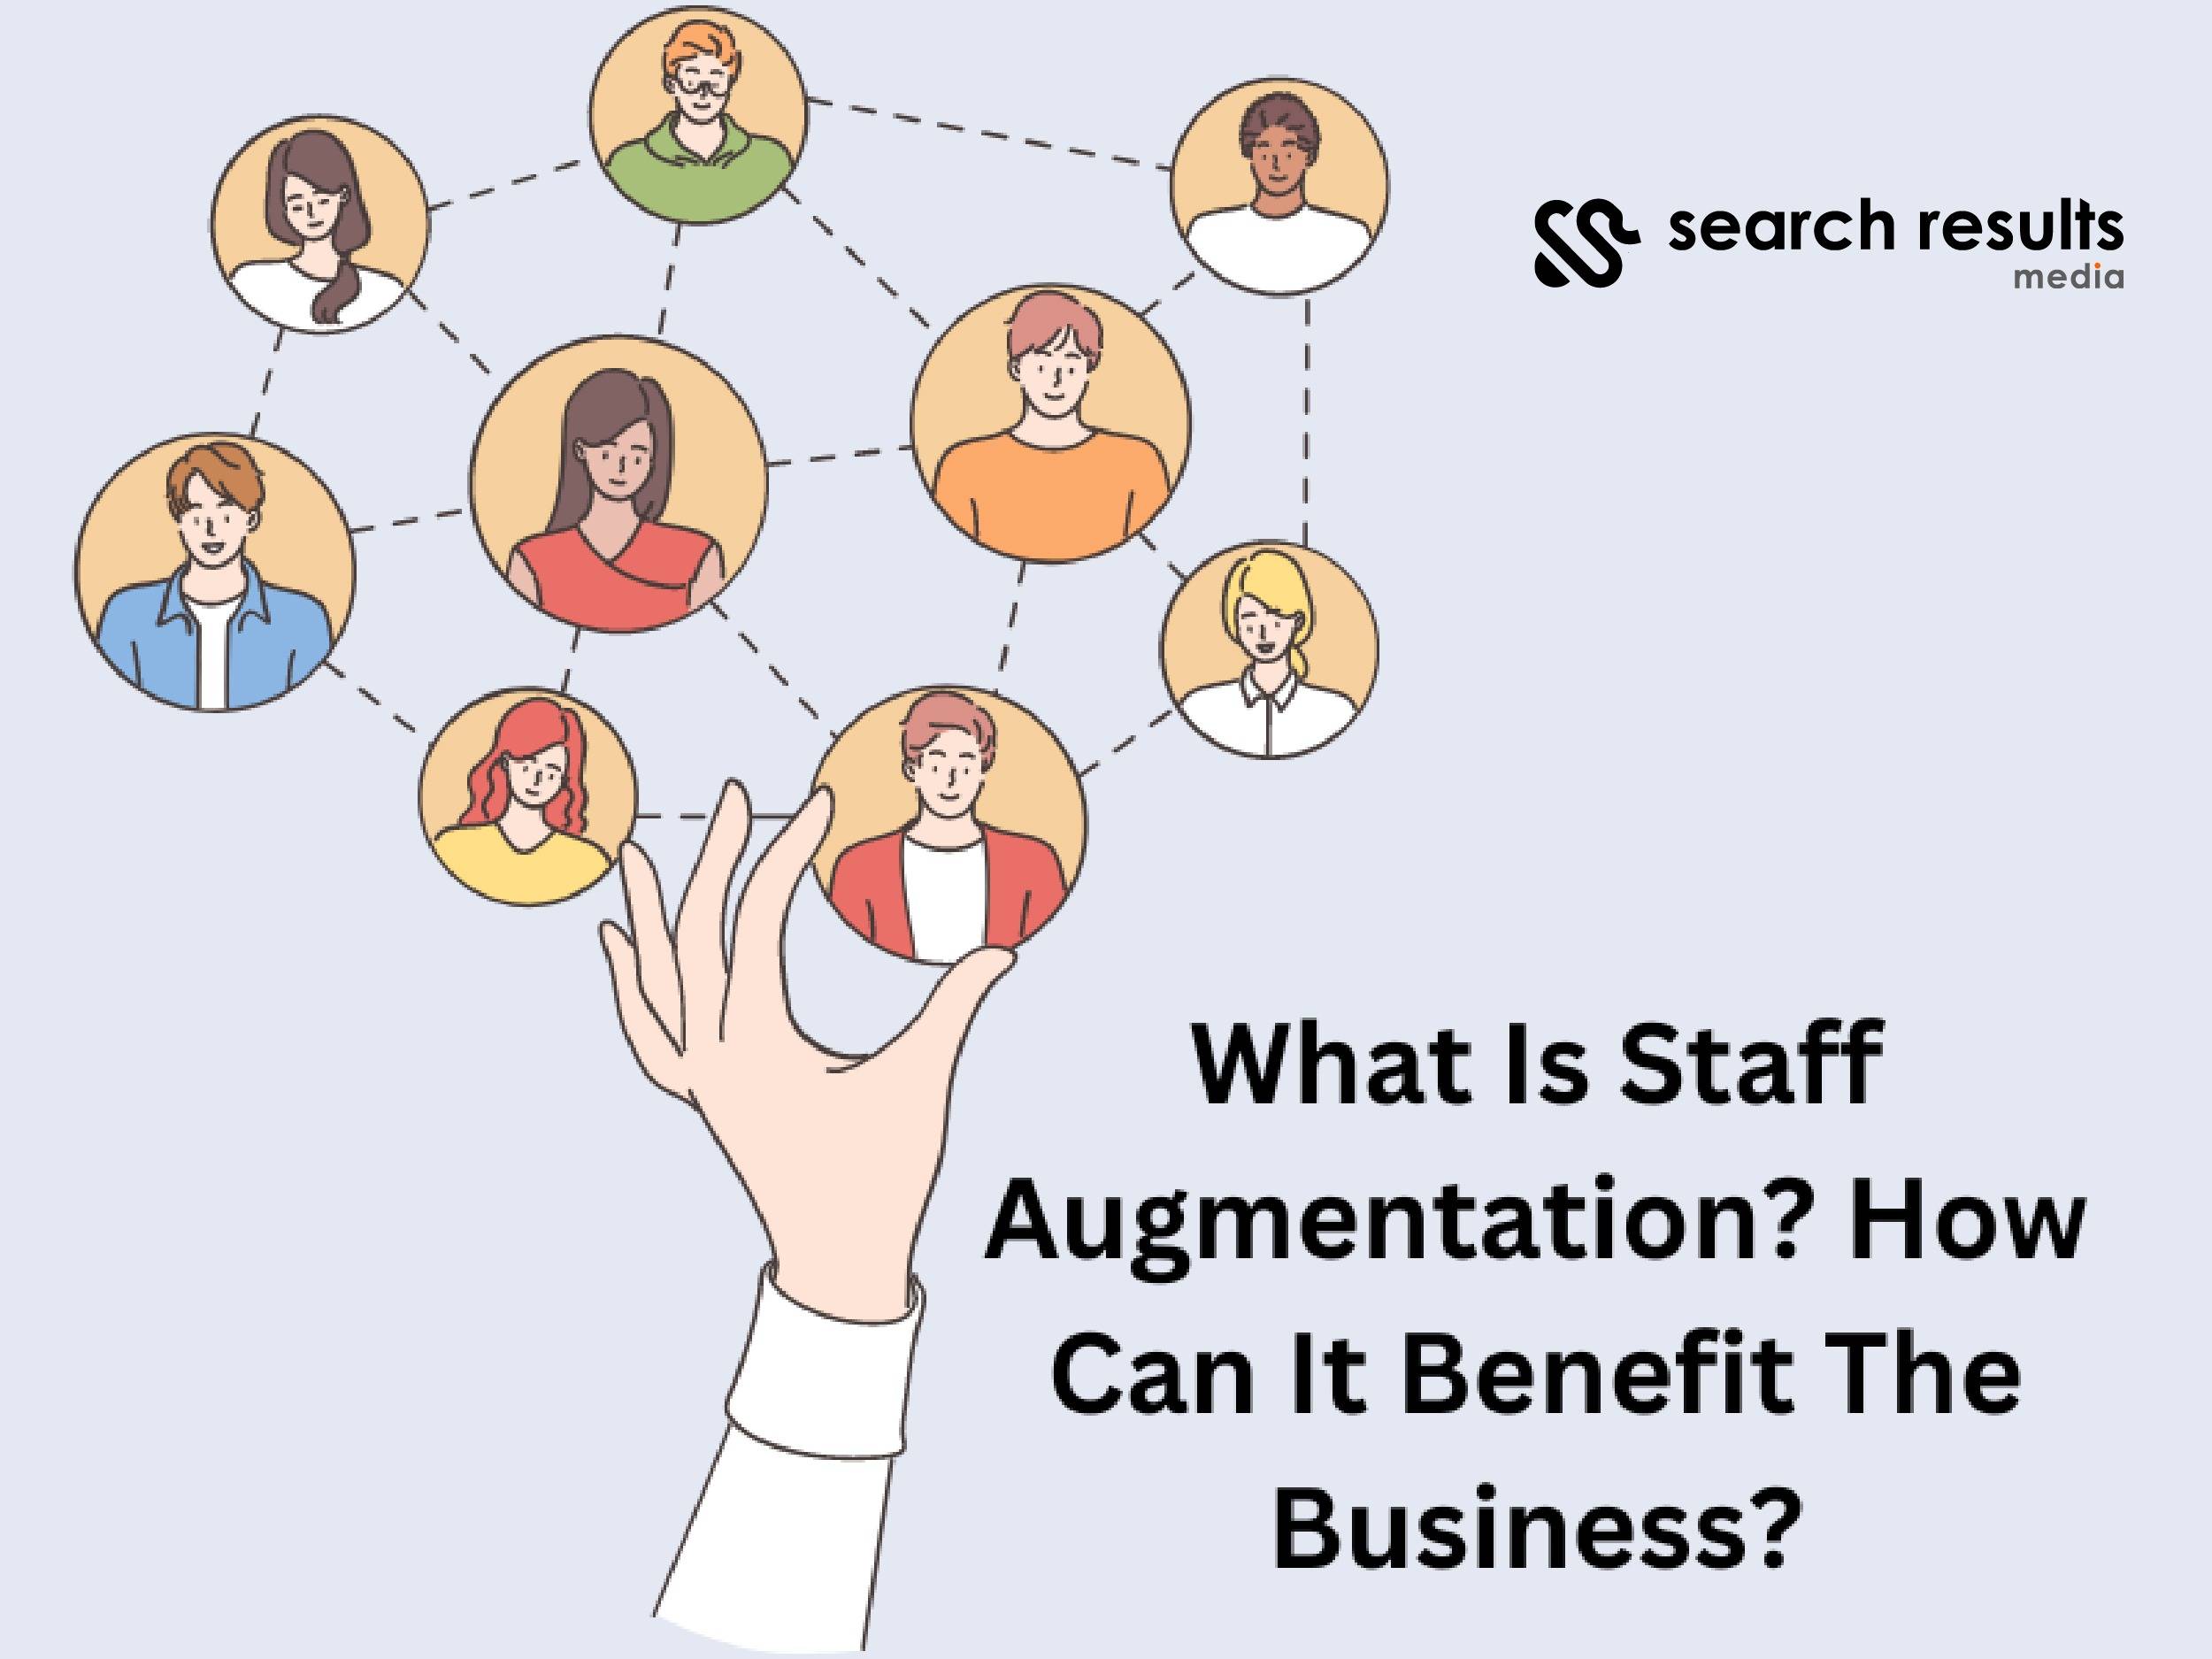 What is Staff Augmentation? How can it benefit the business?